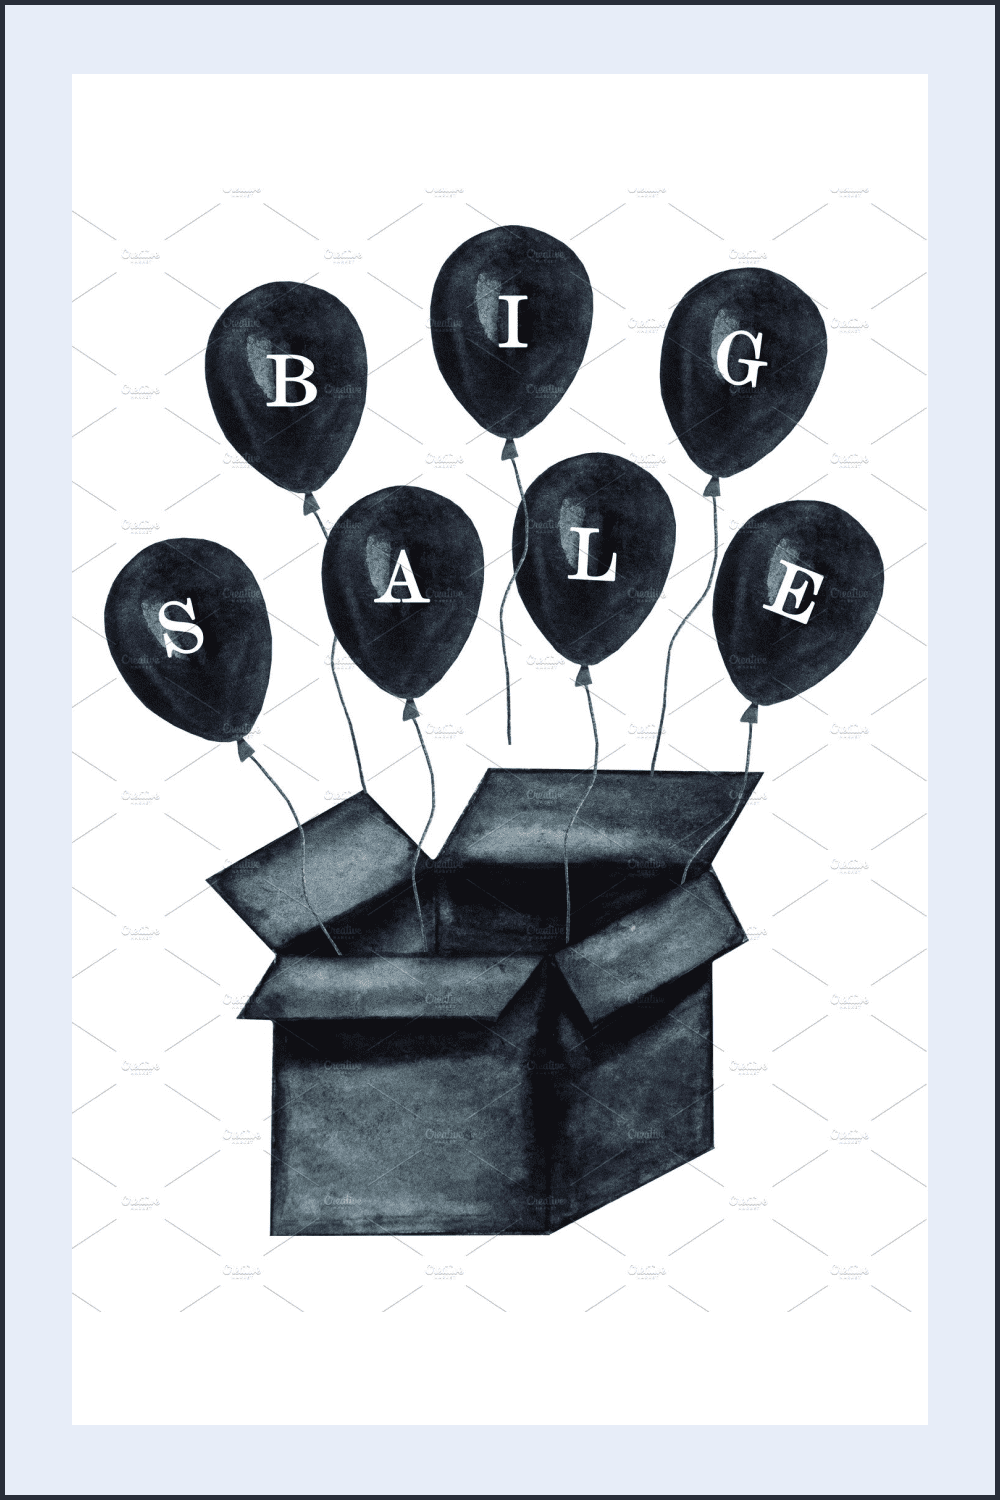 A black box from which black balloons fly out with an inscription Big Sale.